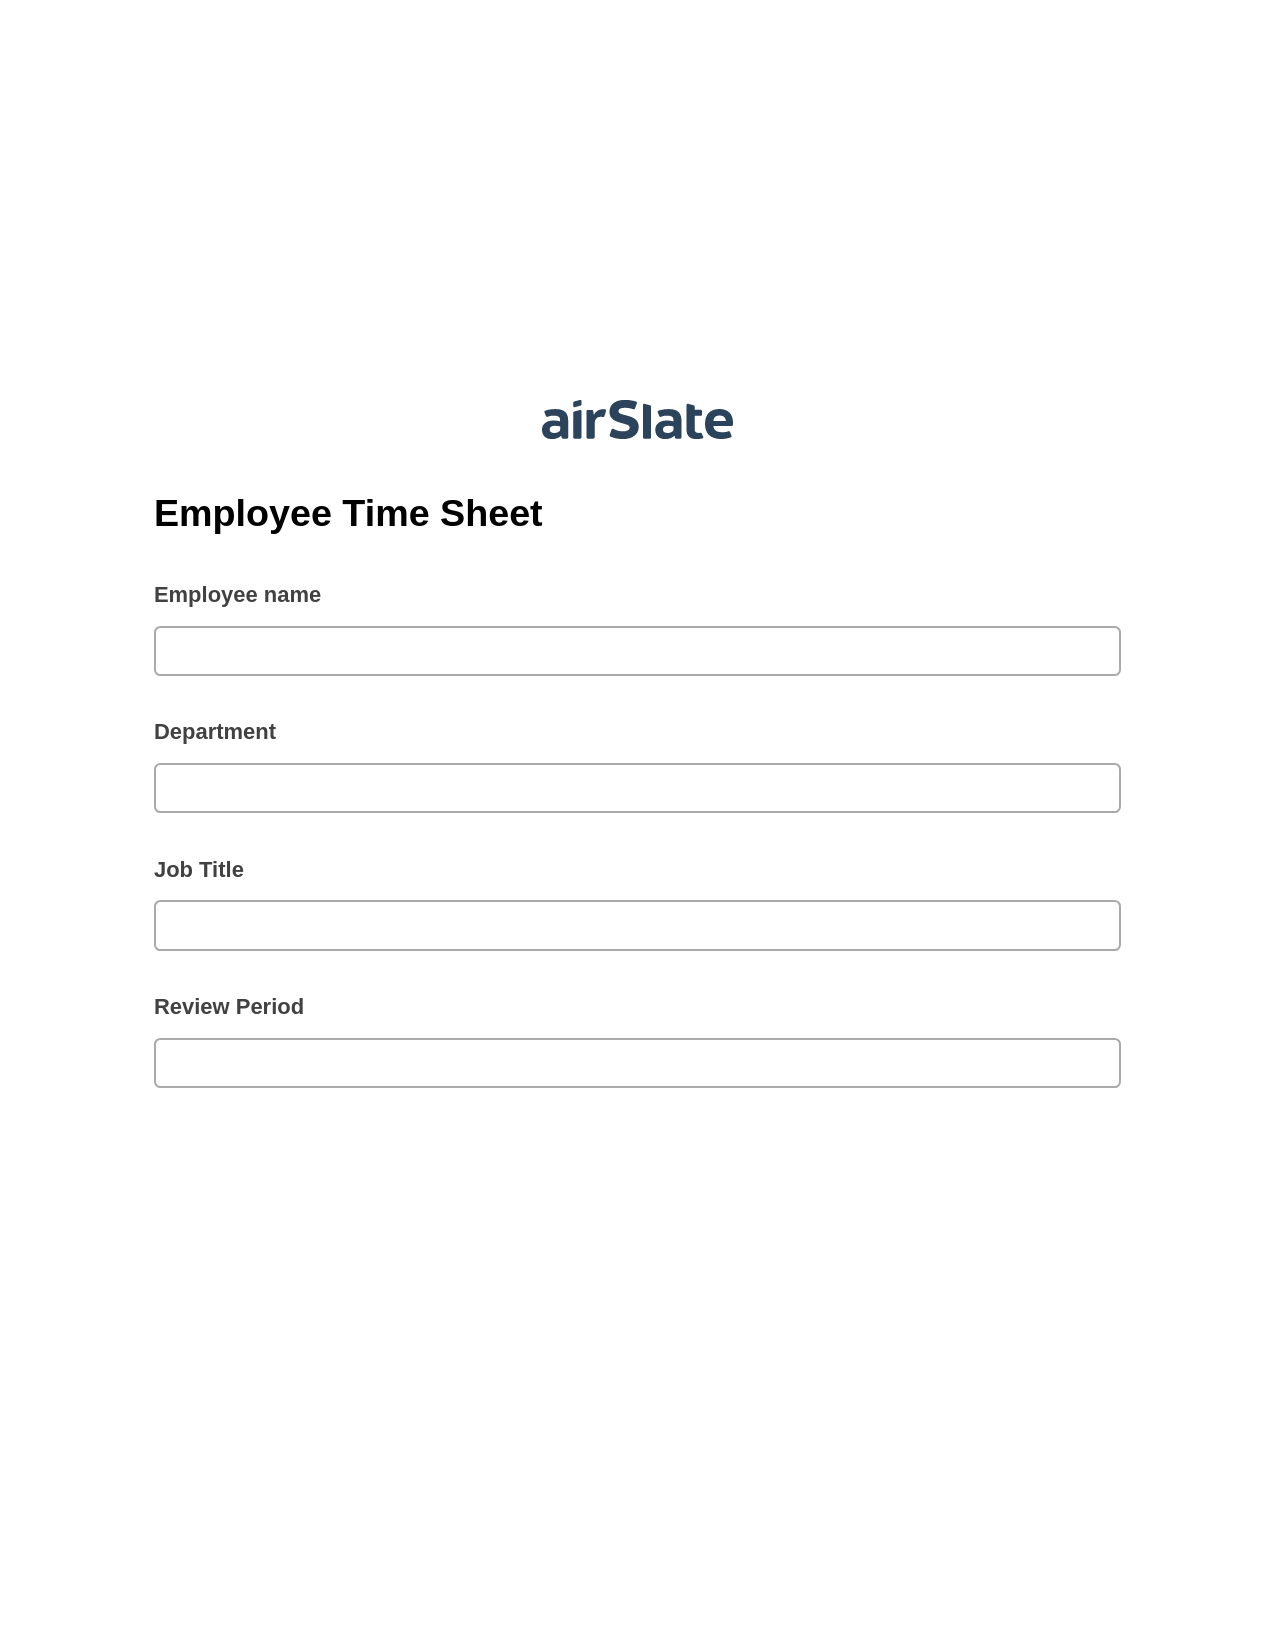 Multirole Employee Time Sheet Pre-fill from CSV File Bot, Create Salesforce Records Bot, Export to Salesforce Record Bot